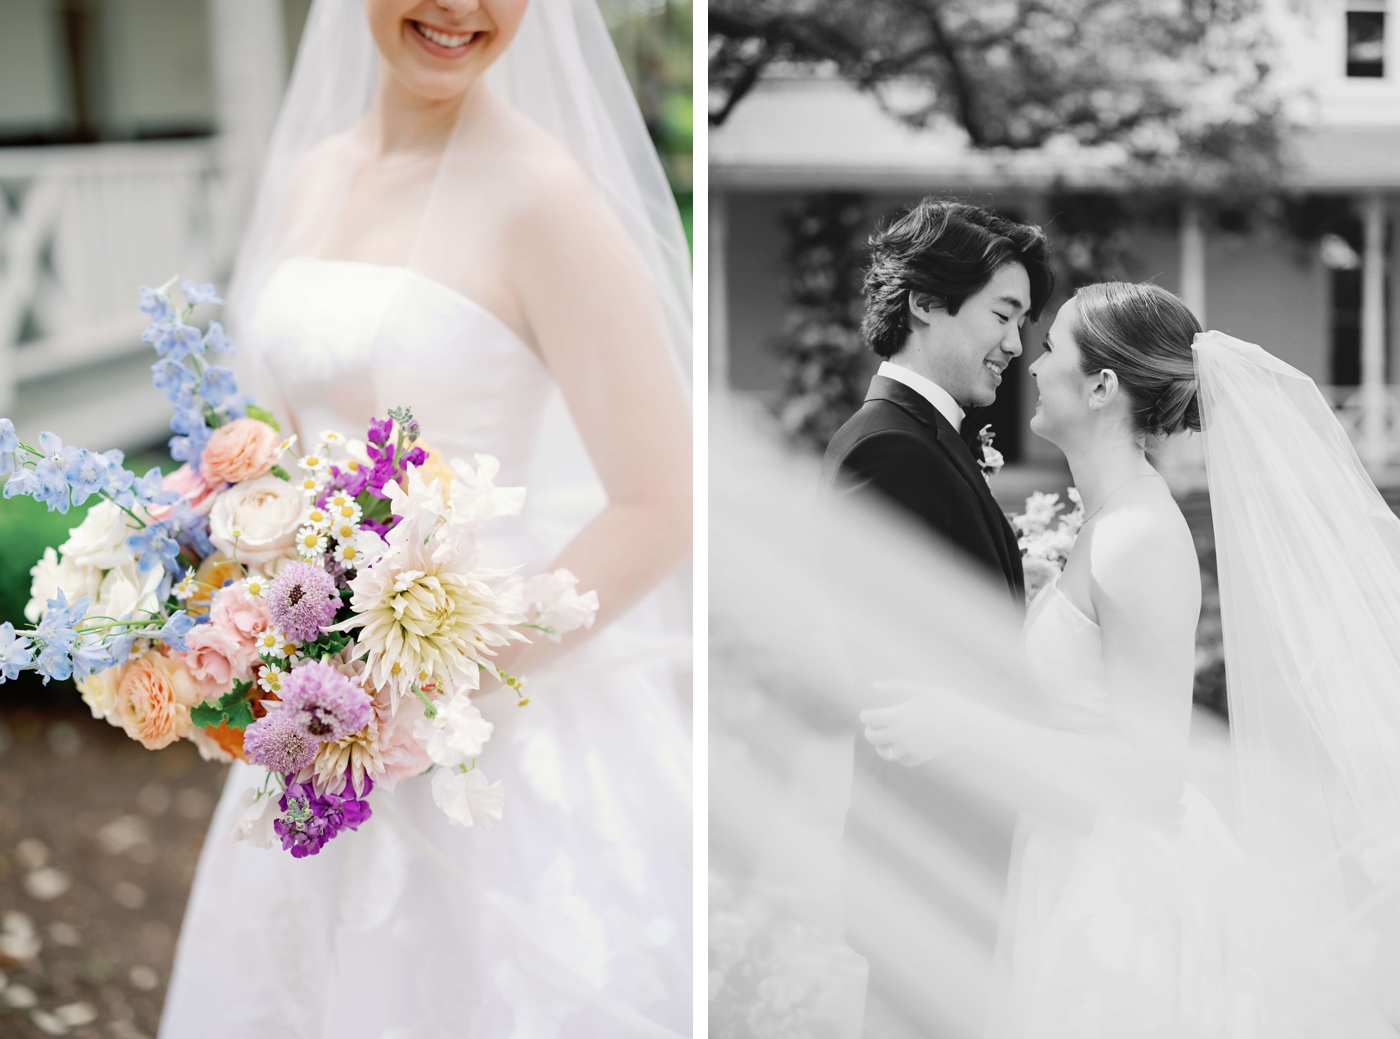 Bridal portraits outdoors, with the bride holding a colorful bouquet and wearing the Rosalie gown by Carolina Herrera